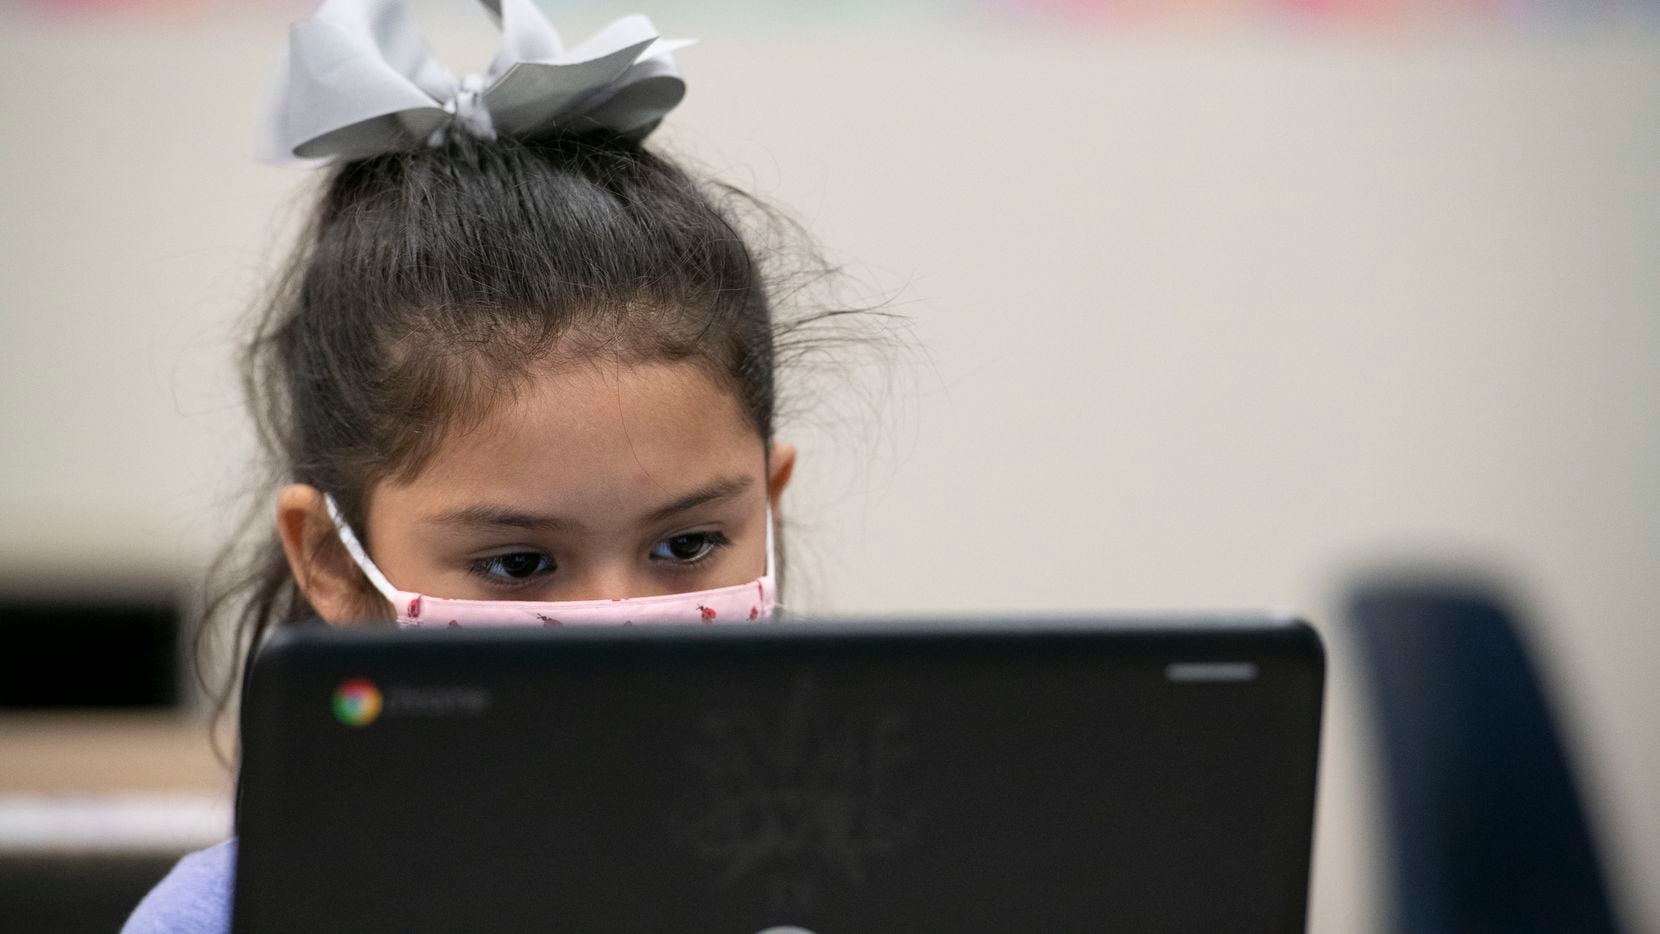 A Mesquite ISD student participates in a classroom session on a computer. Mesquite ISD said Wednesday it will abide by Dallas County Judge Clay Jenkins’ new executive order requiring masks inside schools, businesses and county buildings.